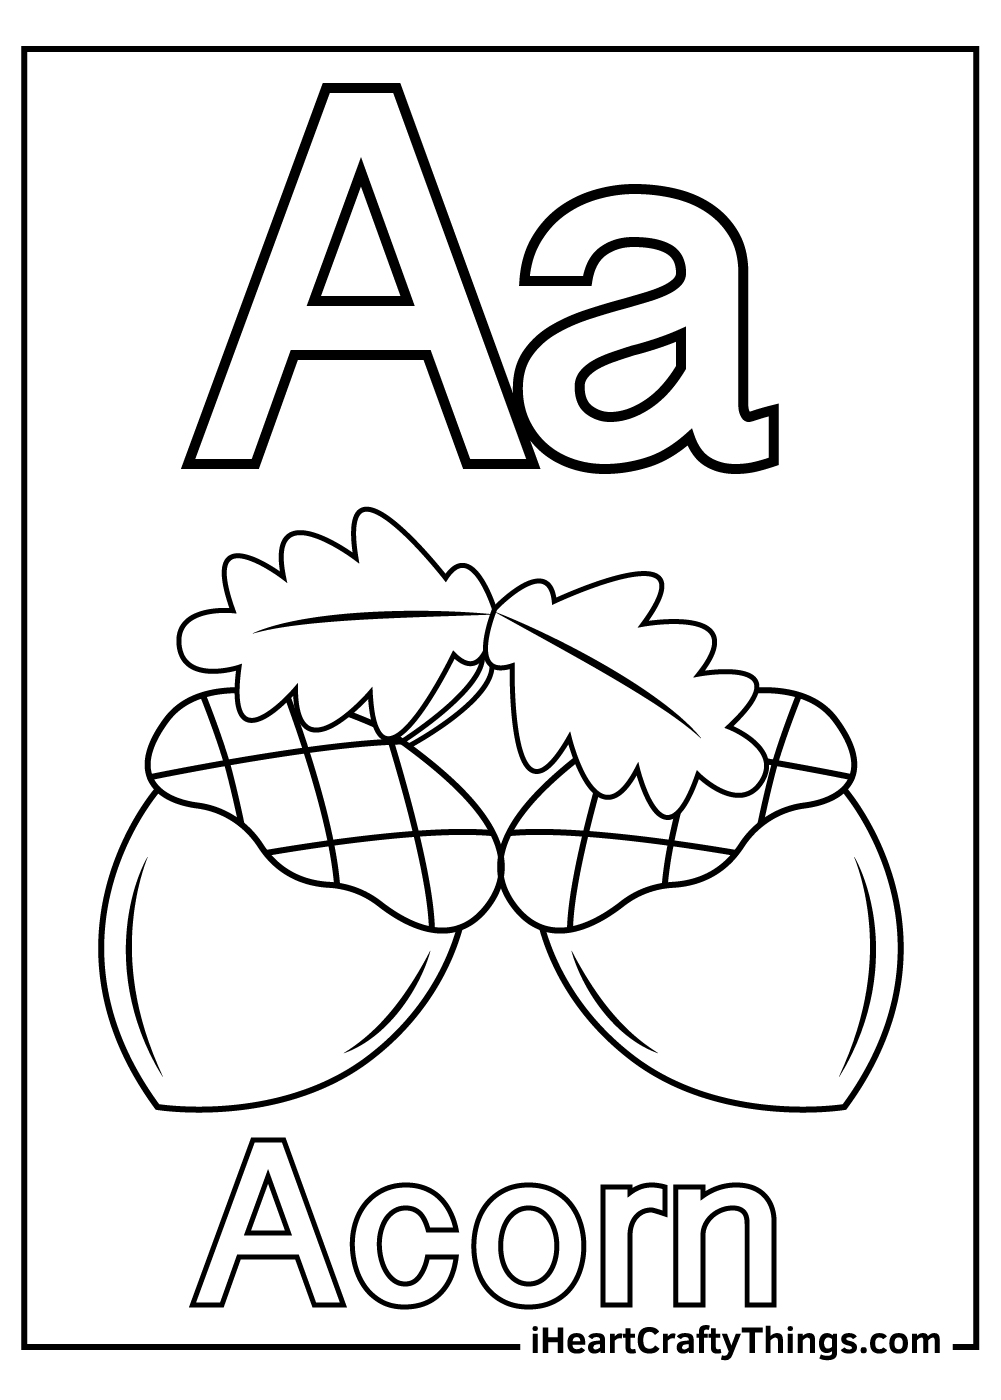 Letter a coloring pages free printables